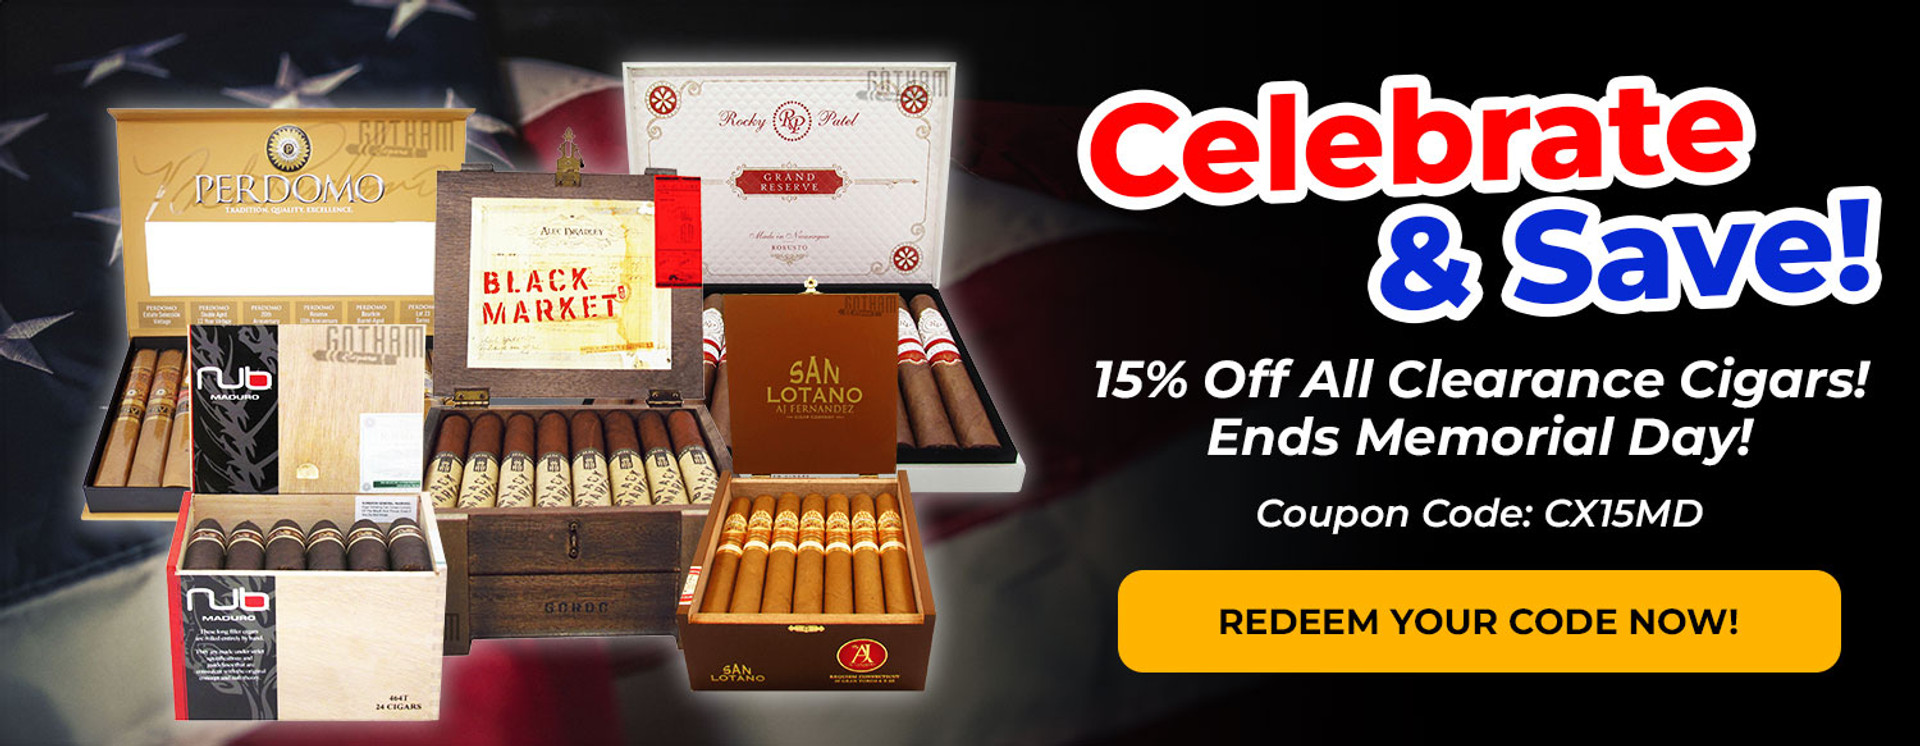 Celebrate and Save! 15% Off all Clearance Cigars